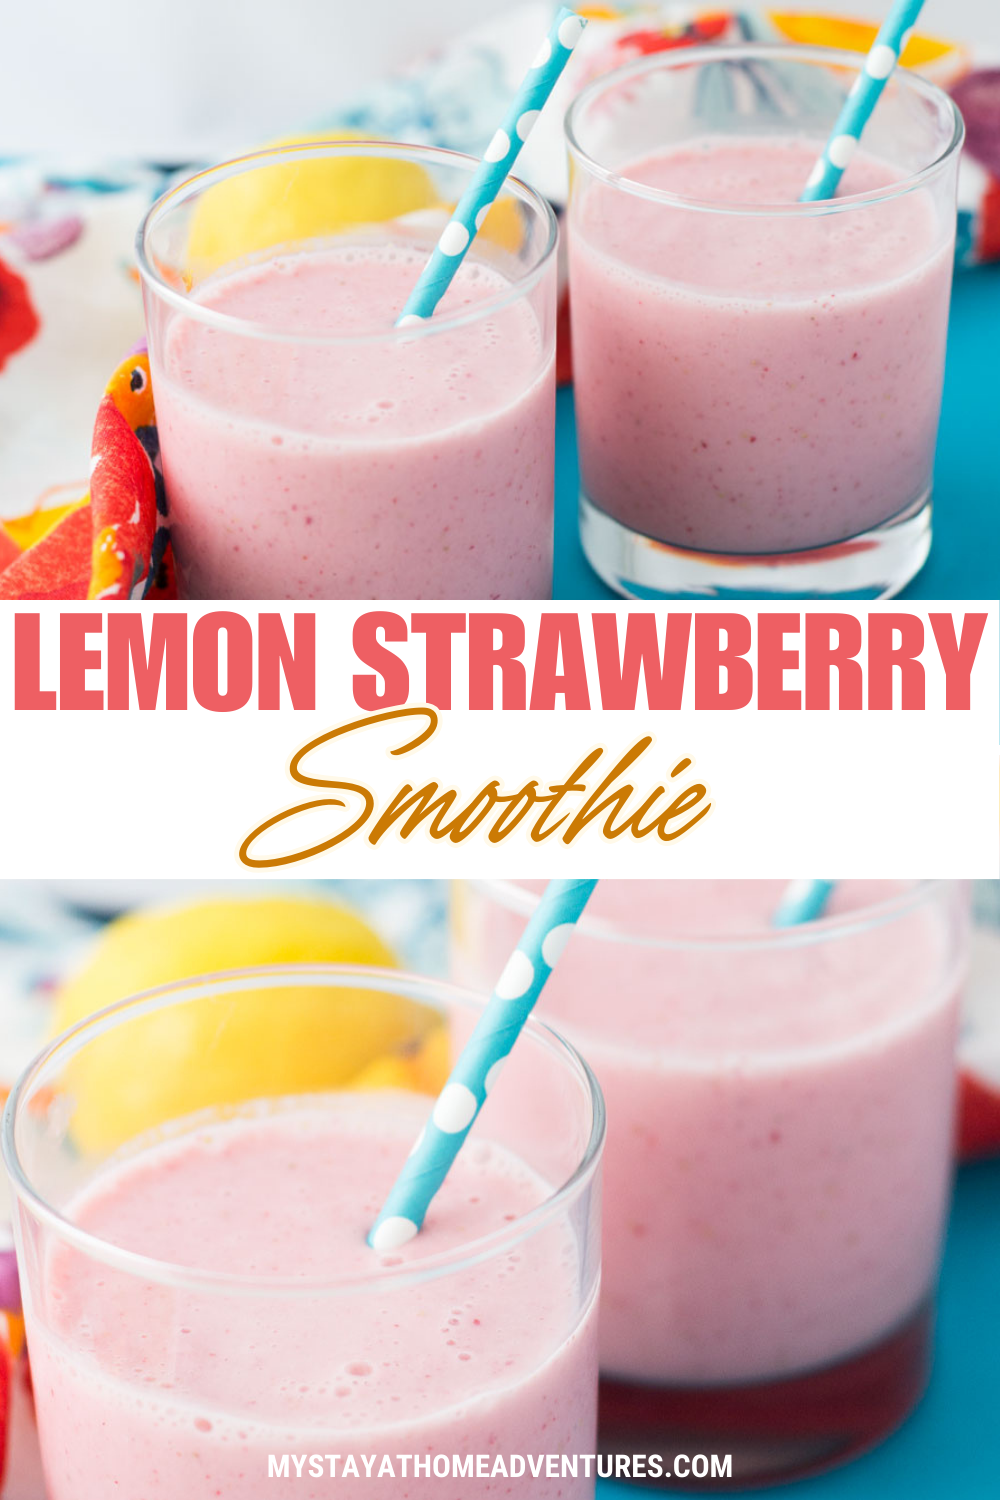 An image of two glasses of Lemon Strawberry Smoothie with the text - Lemon Strawberry Smoothie. The site's link is also included in the image.